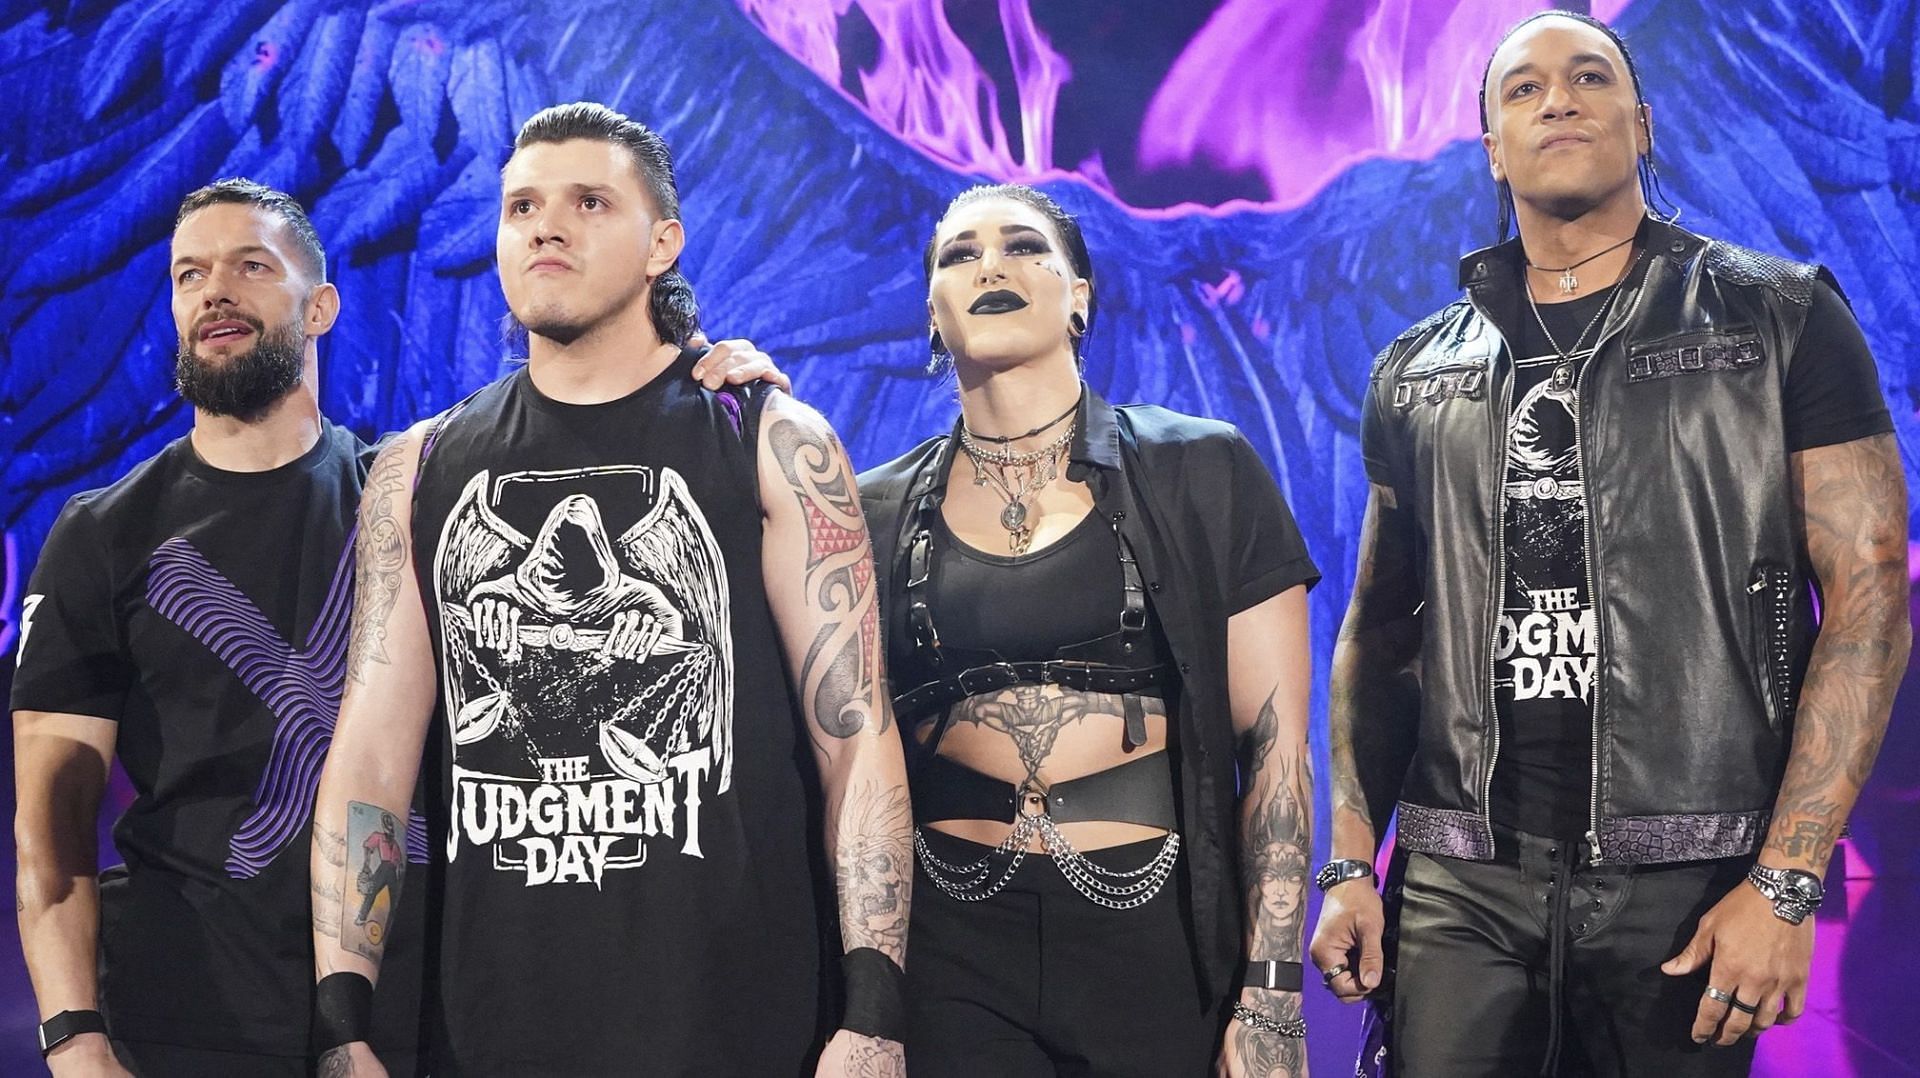 Judgment Day is faction on WWE RAW brand.